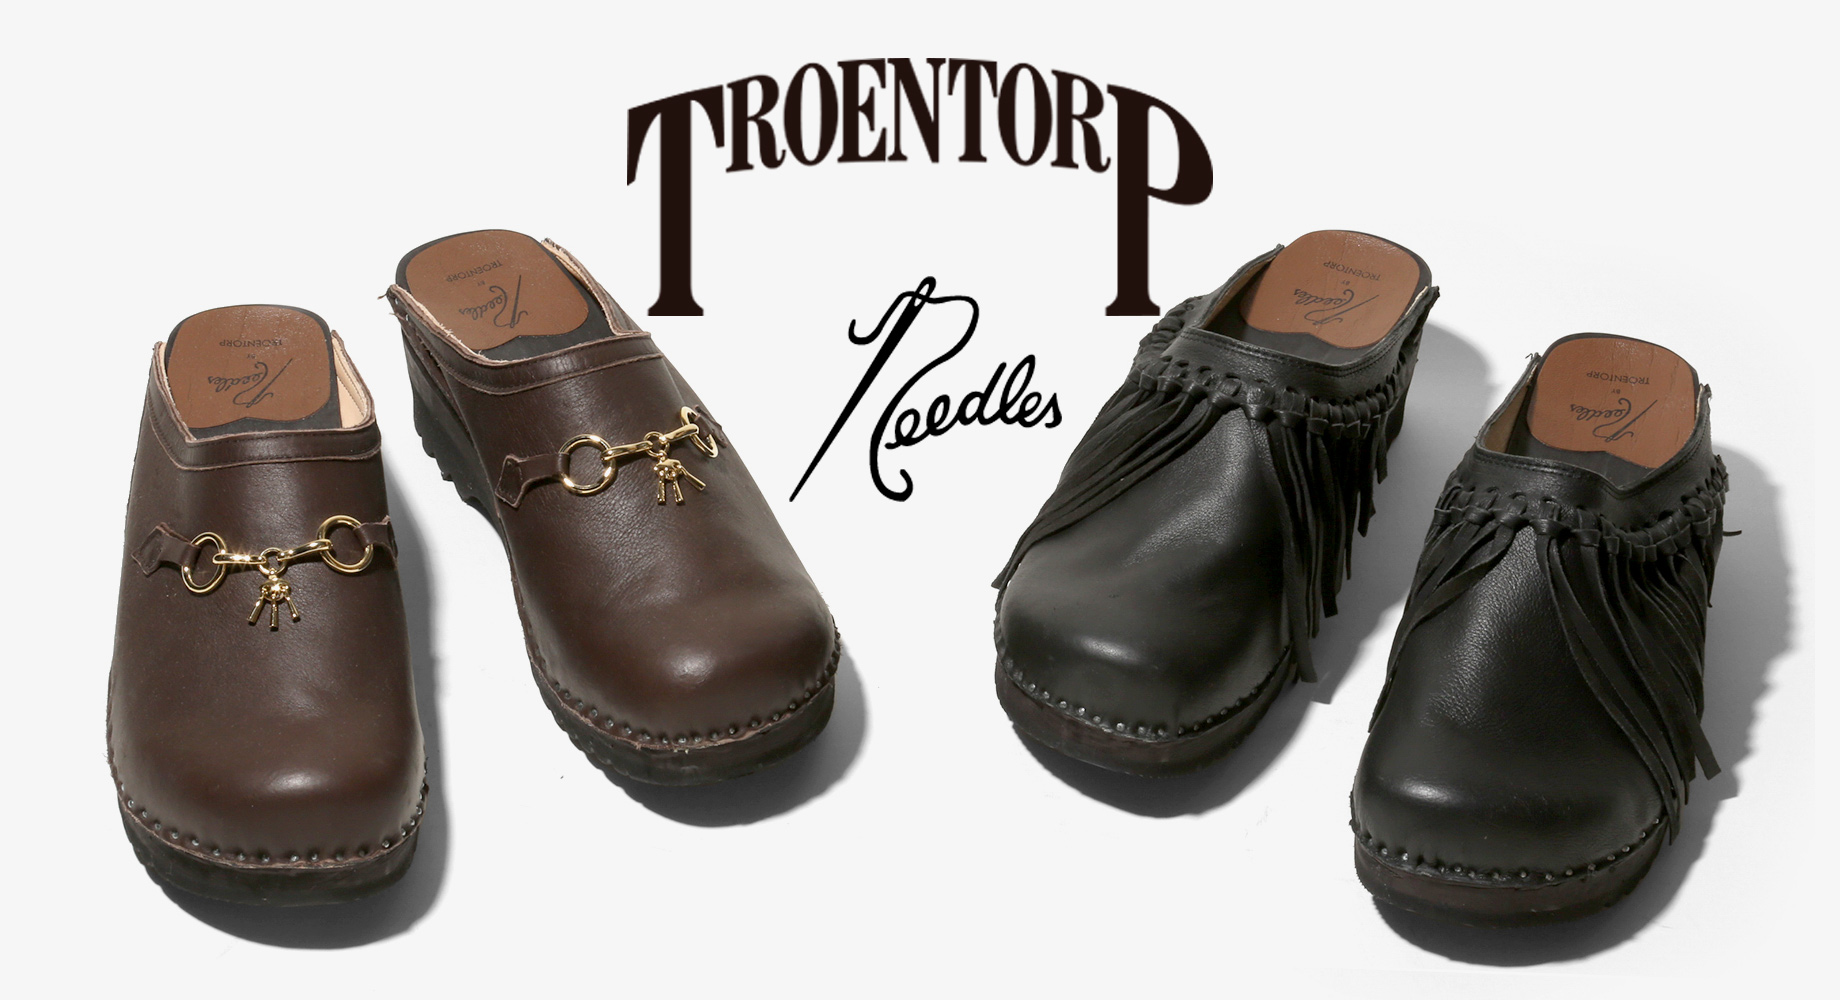 〈TROENTORP〉x〈NEEDLES〉- SWEDISH CLOG in NEW MATERIAL